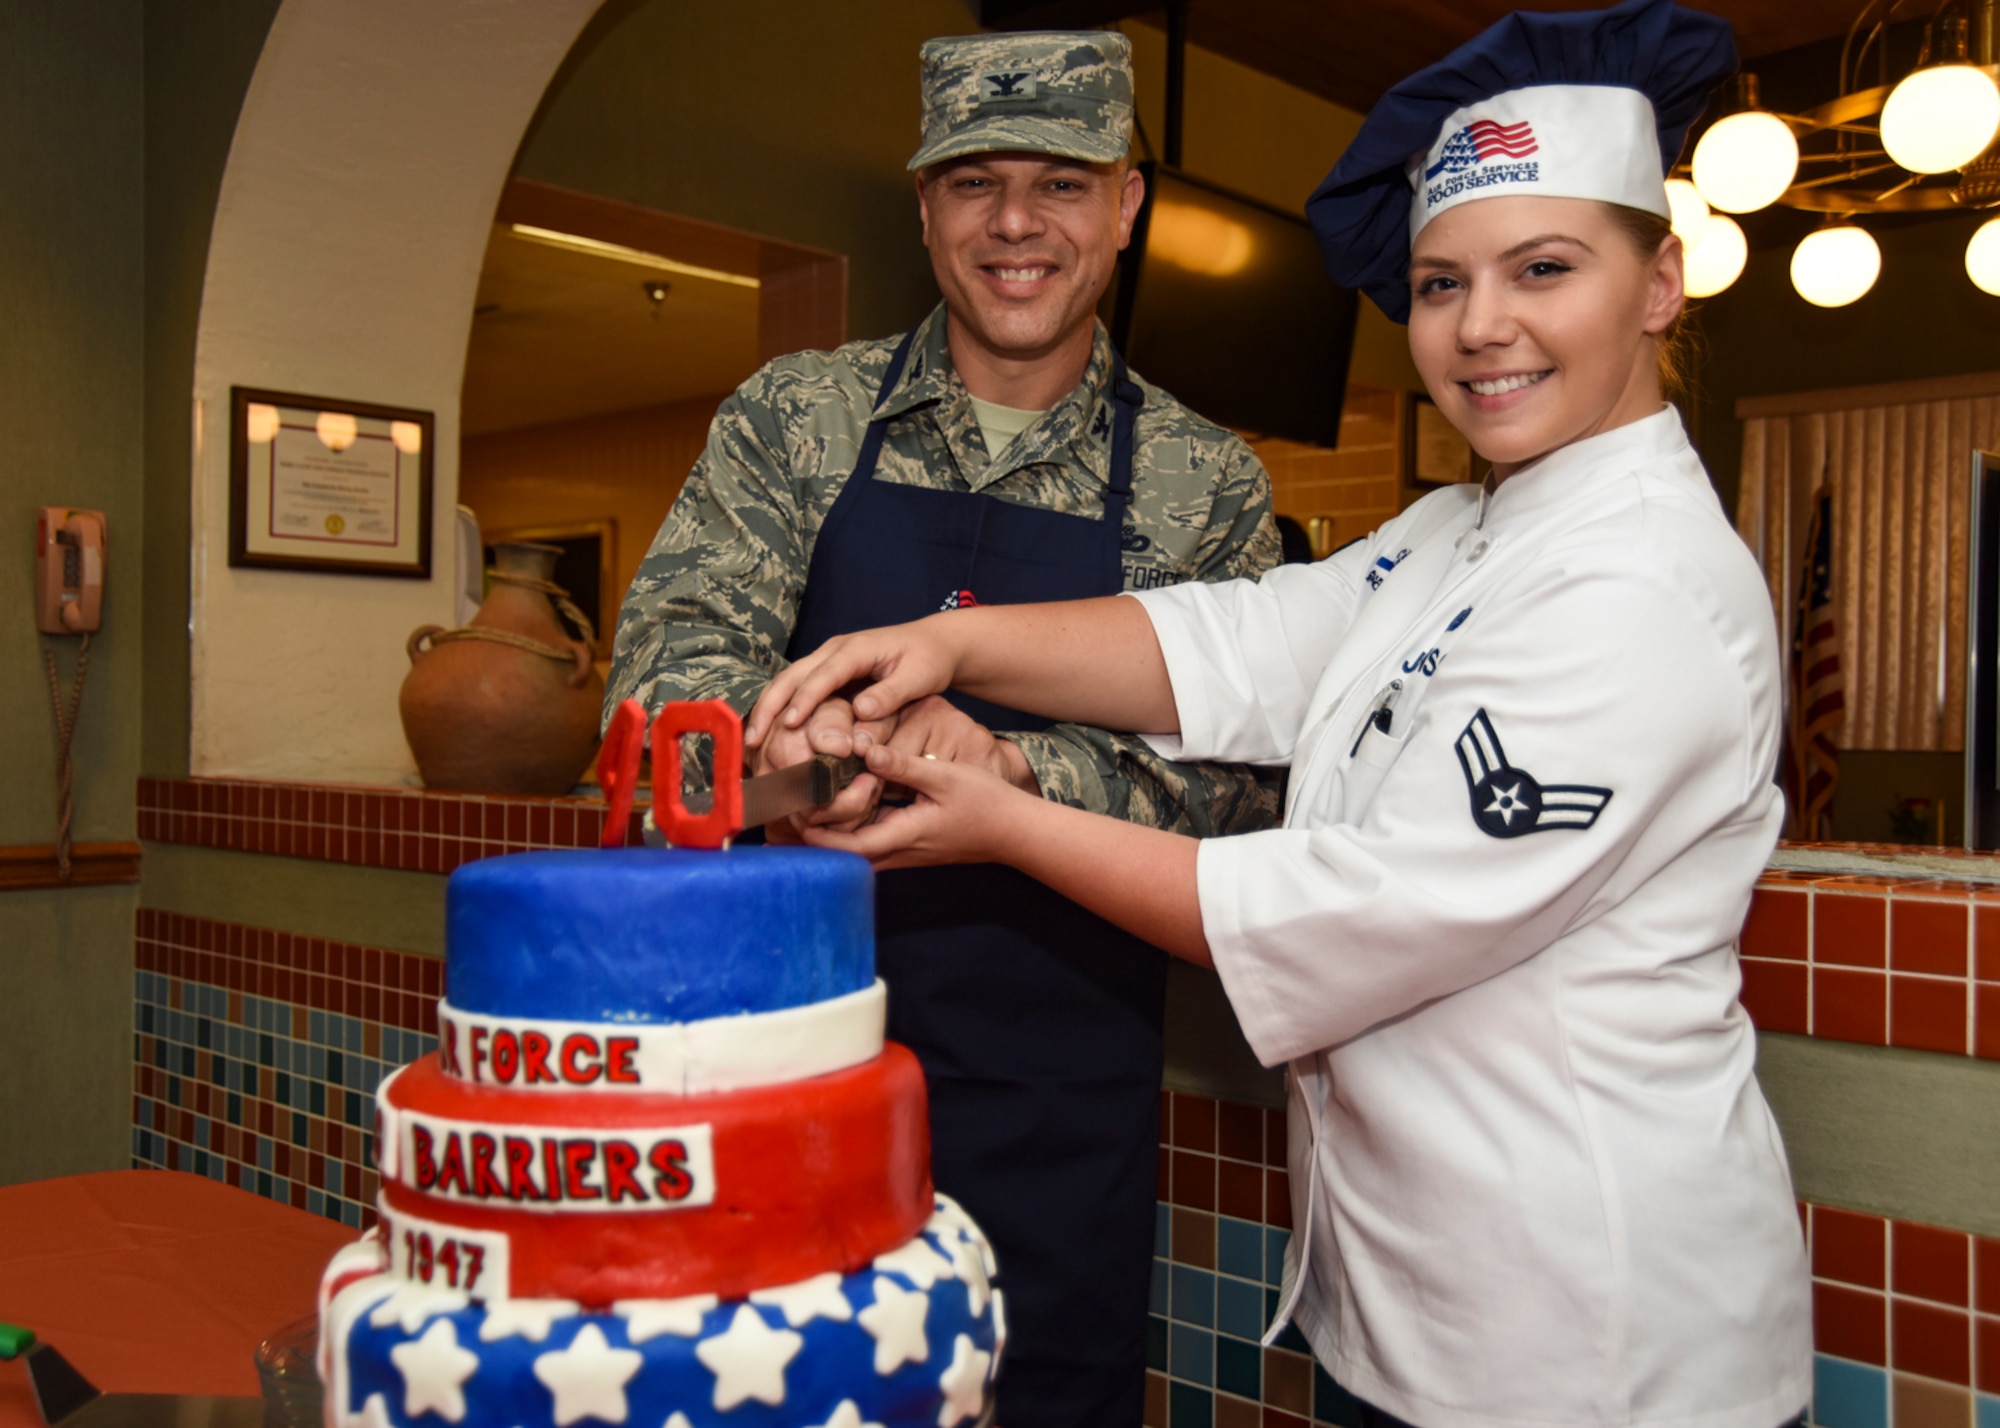 Col. Mathew Boschert, 99th Mission Support Group commander, and Airman 1st Class Rebecca Johnson, 99th Force Support Squadron chef, prepare to cut the Air Force's 70th anniversary cake at Nellis Air Force Base, Nevada, Sept. 18, 2017. The cake took more than three days to prepare, perfect and present before being served to Airmen at the Crosswinds Inn dining facility. (U.S. Air Force photo by Airman 1st Class Andrew D. Sarver/Released)